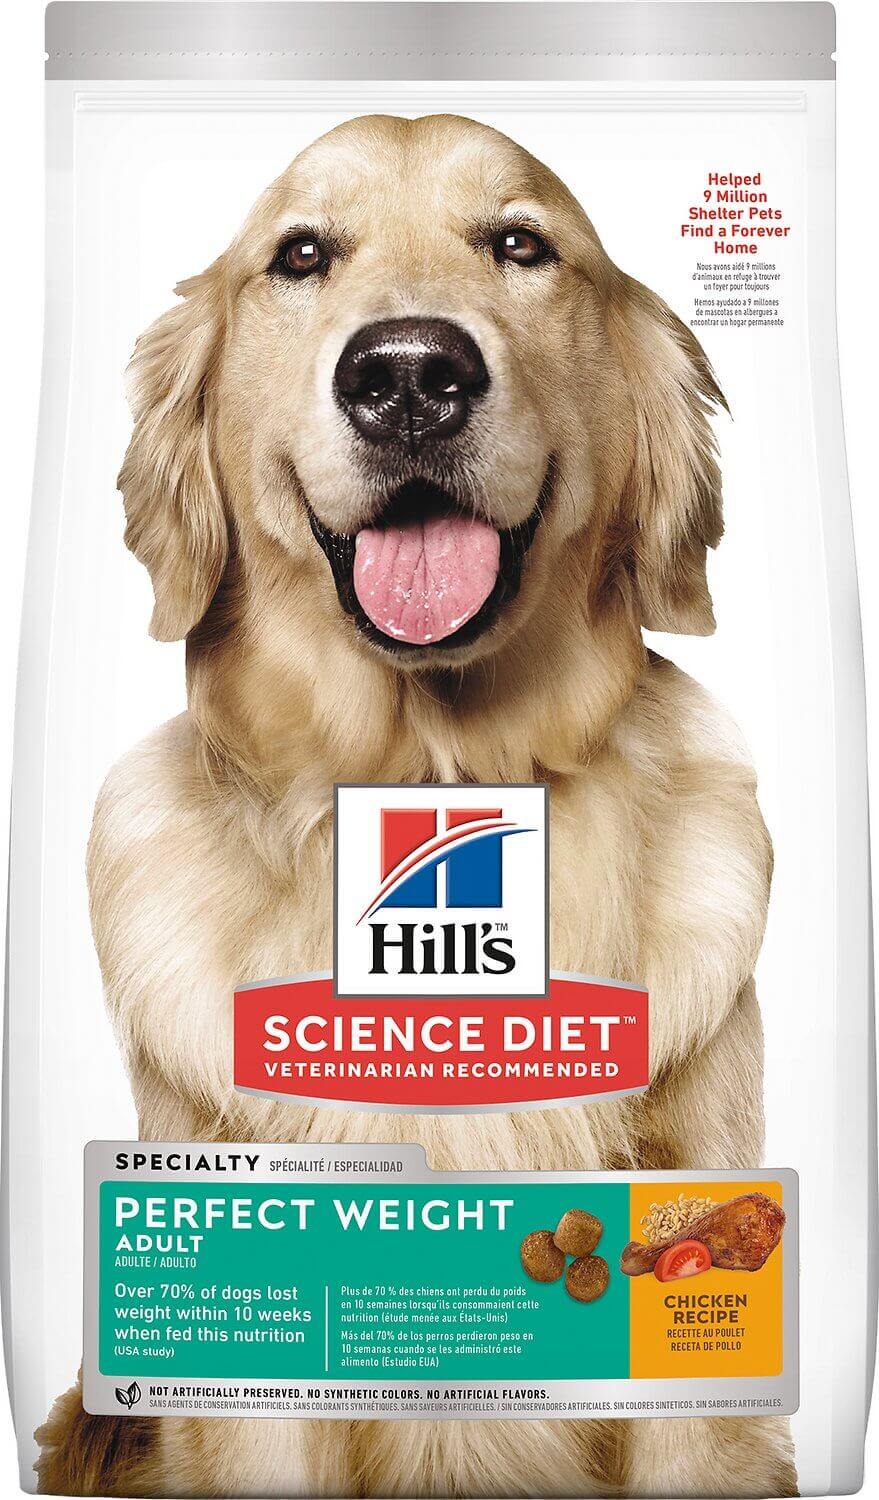 Hill’s Science Diet Adult Perfect Weight Dog Food Review (Canned)